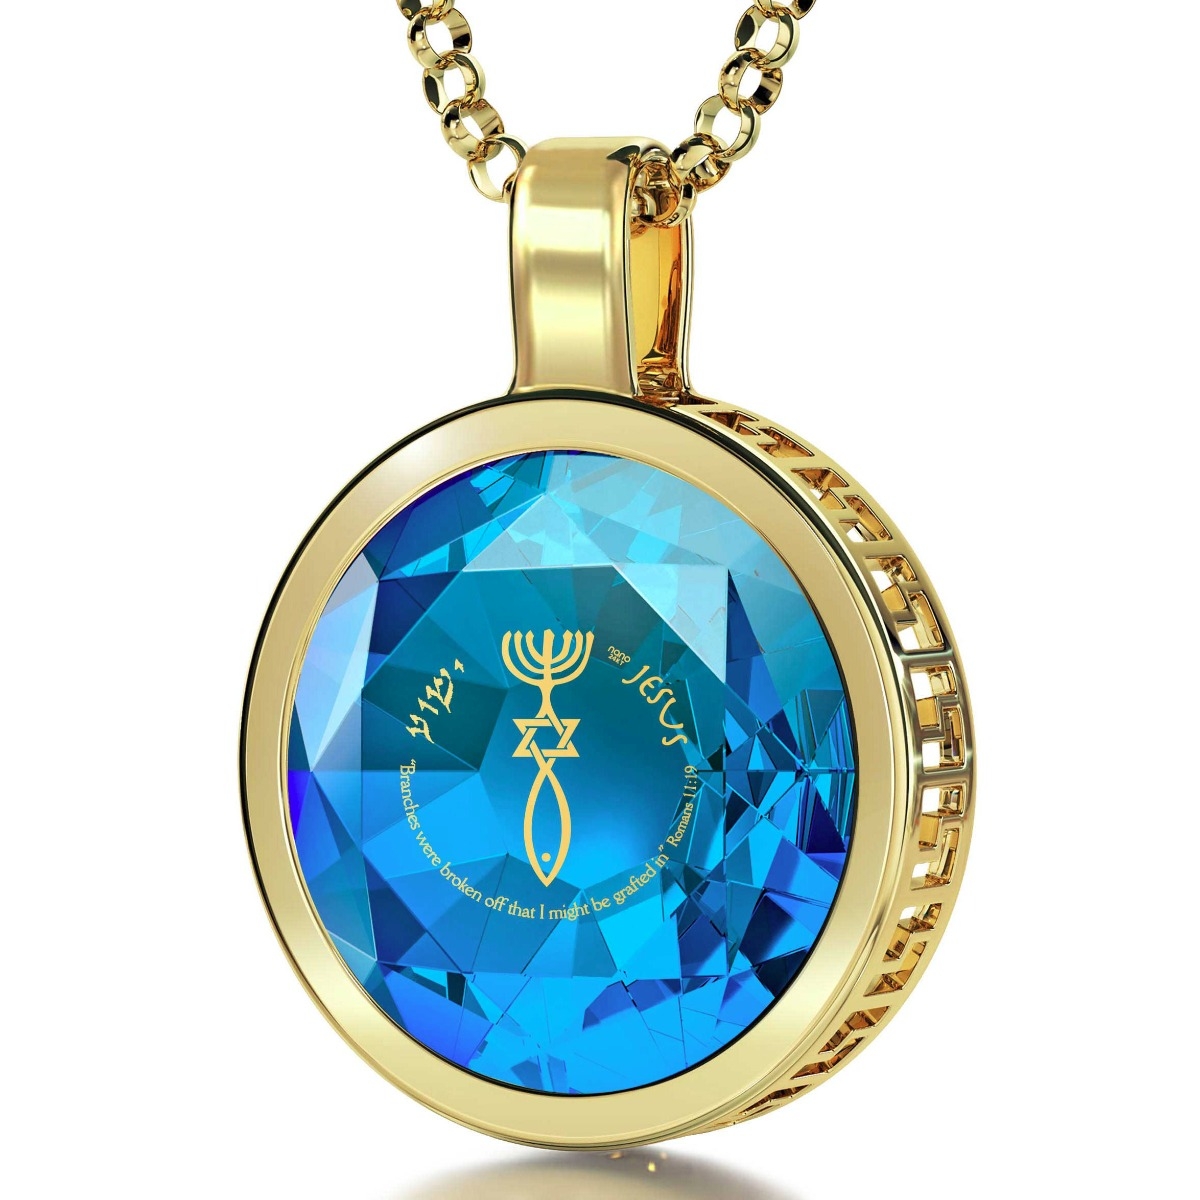 Nano 24K Gold Plated and Gemstone Grafted-In Necklace with 24K Gold Micro-Inscription (Blue) - 1